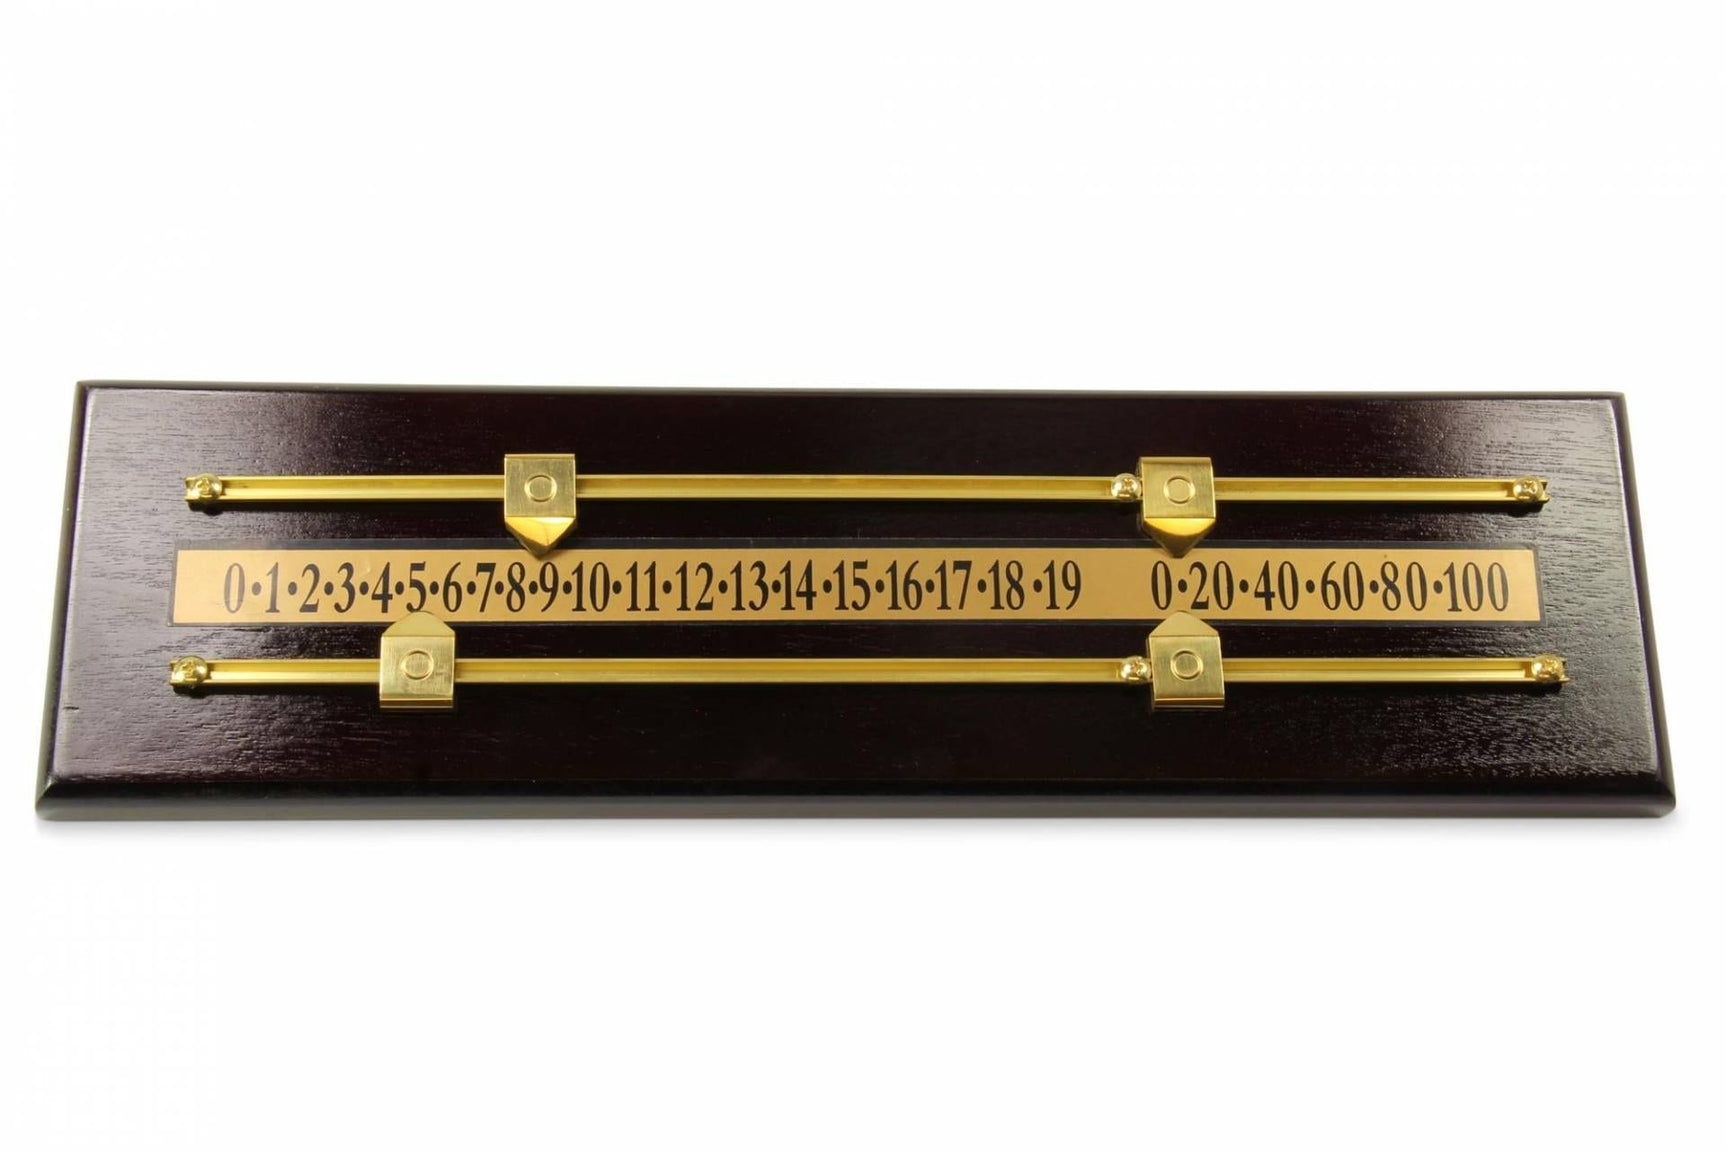 MAHOGANY Effect MDF Wooden Snooker Scoreboard for 2 Players with Brass Markers and Rails - 17.5 Inches